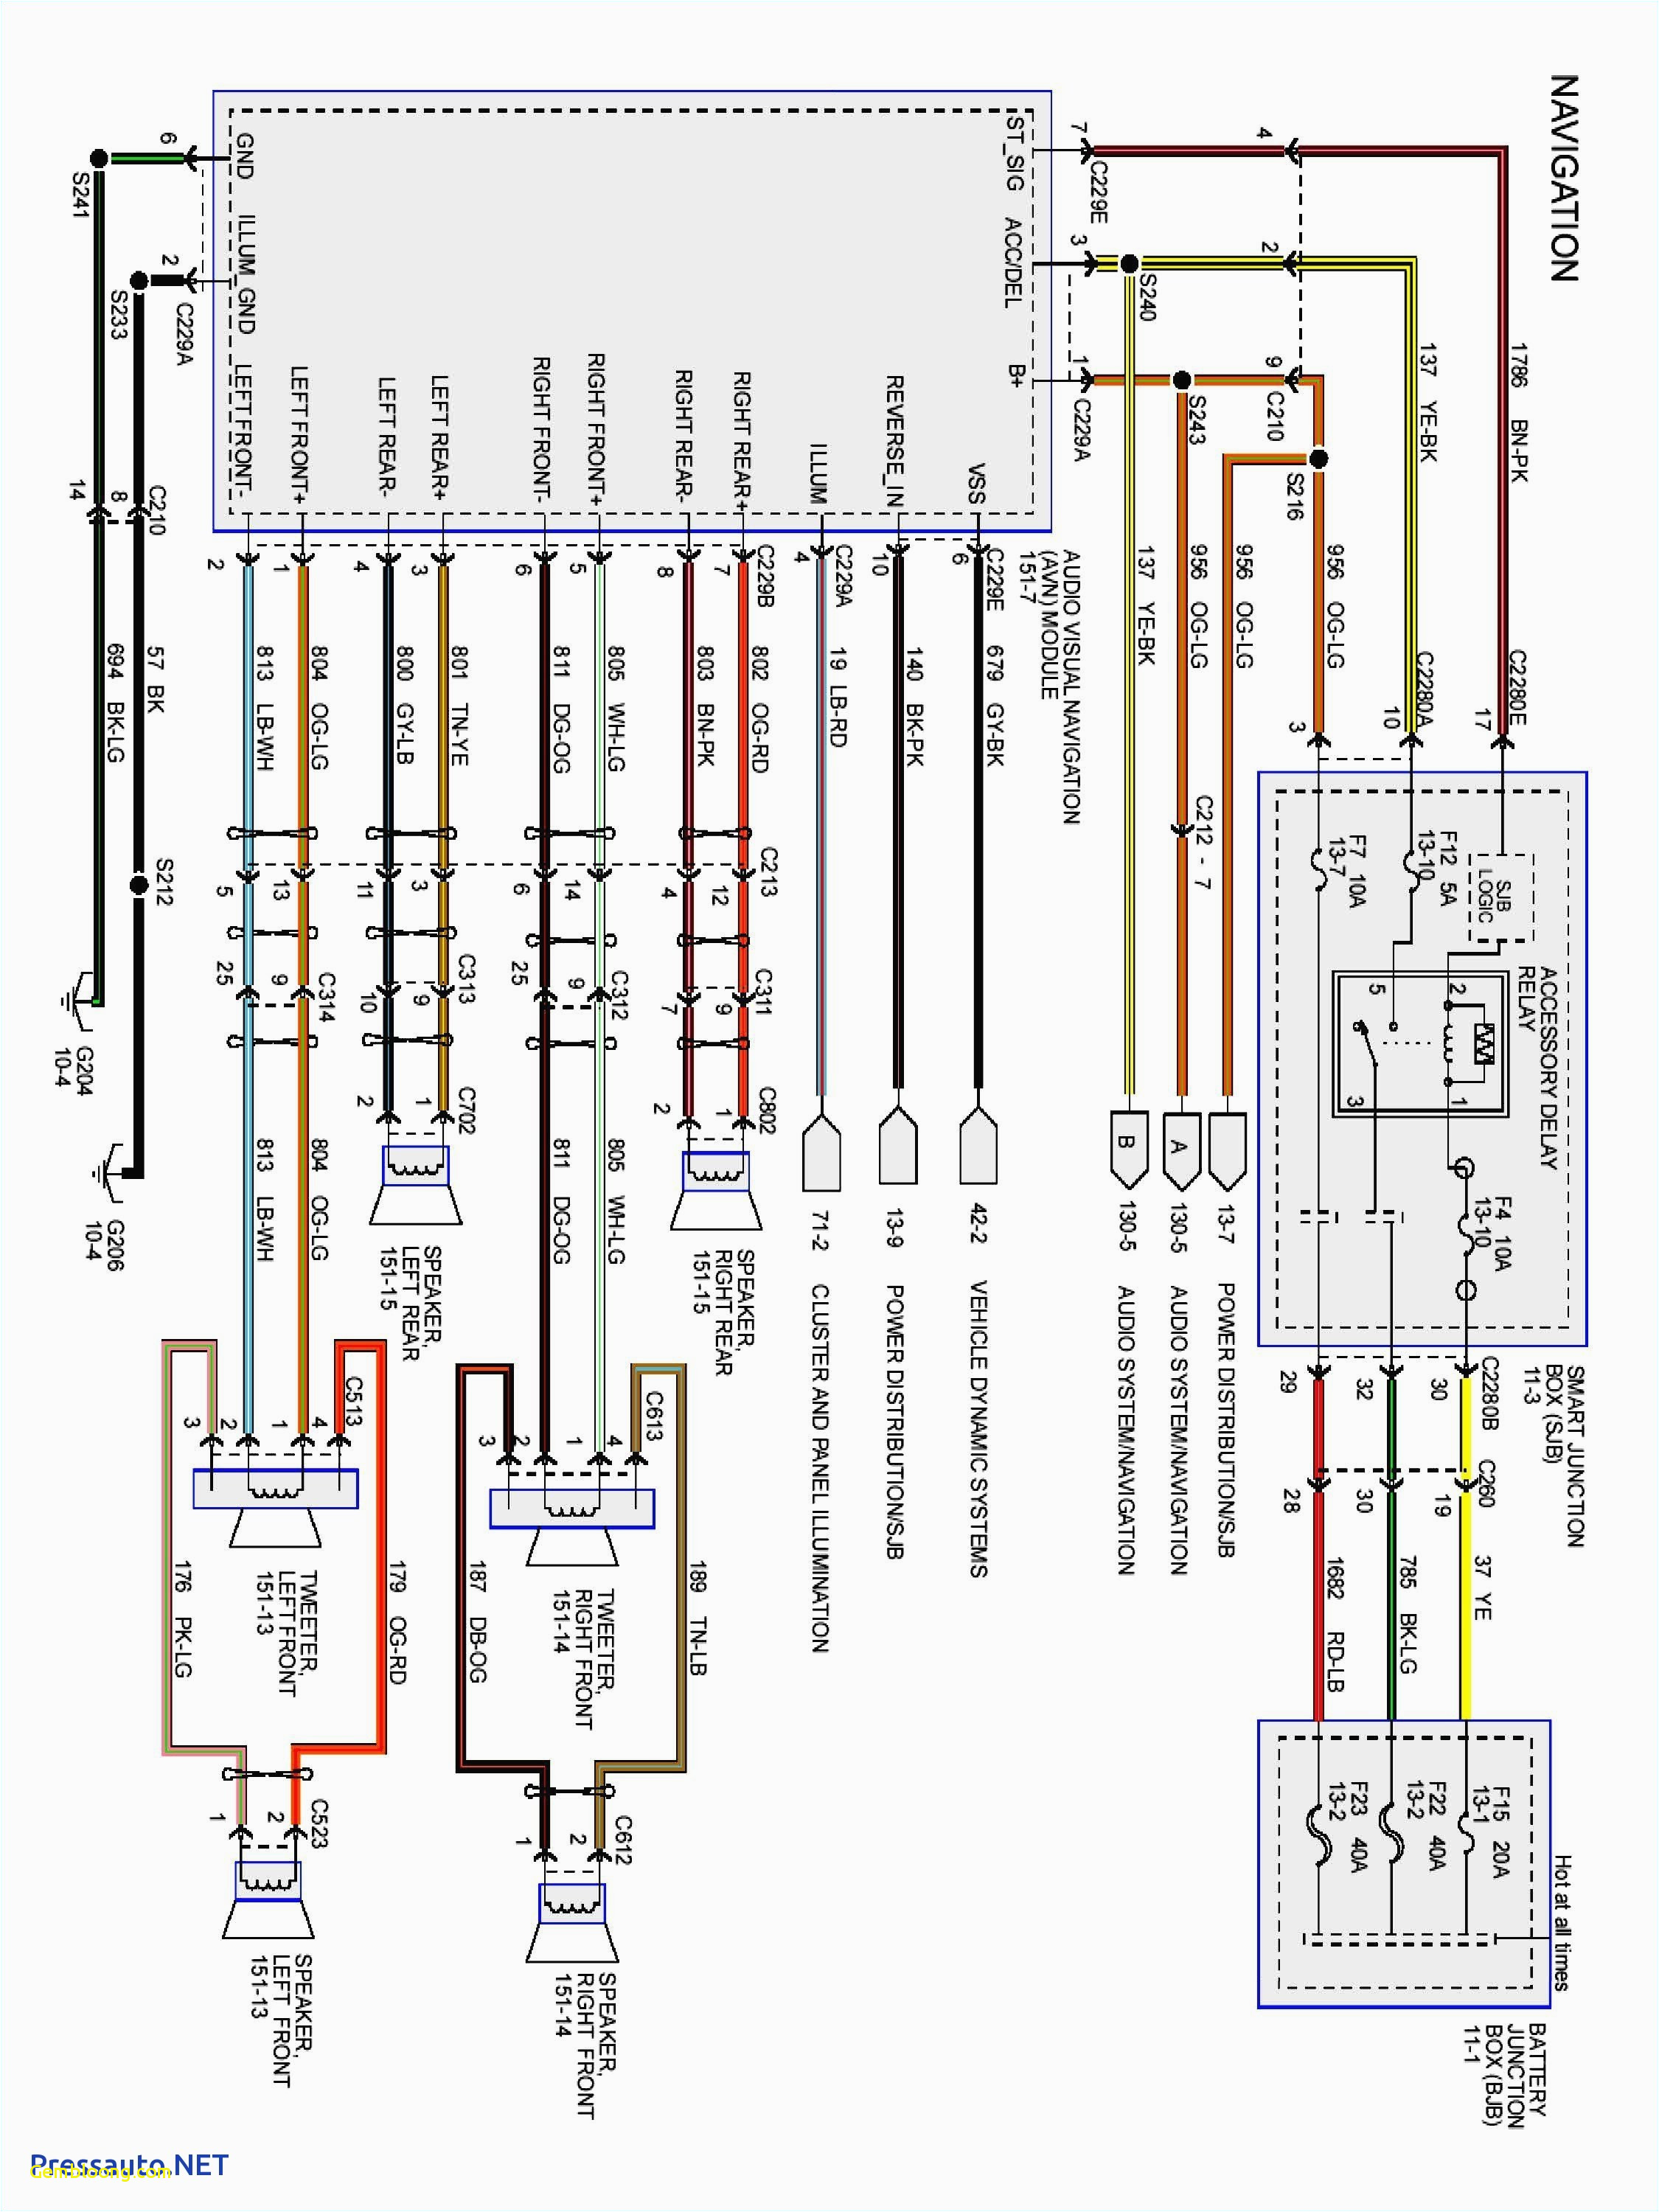 abs wiring diagram 2008 ford fusion premium wiring diagram blog abs wiring diagram 2008 ford fusion